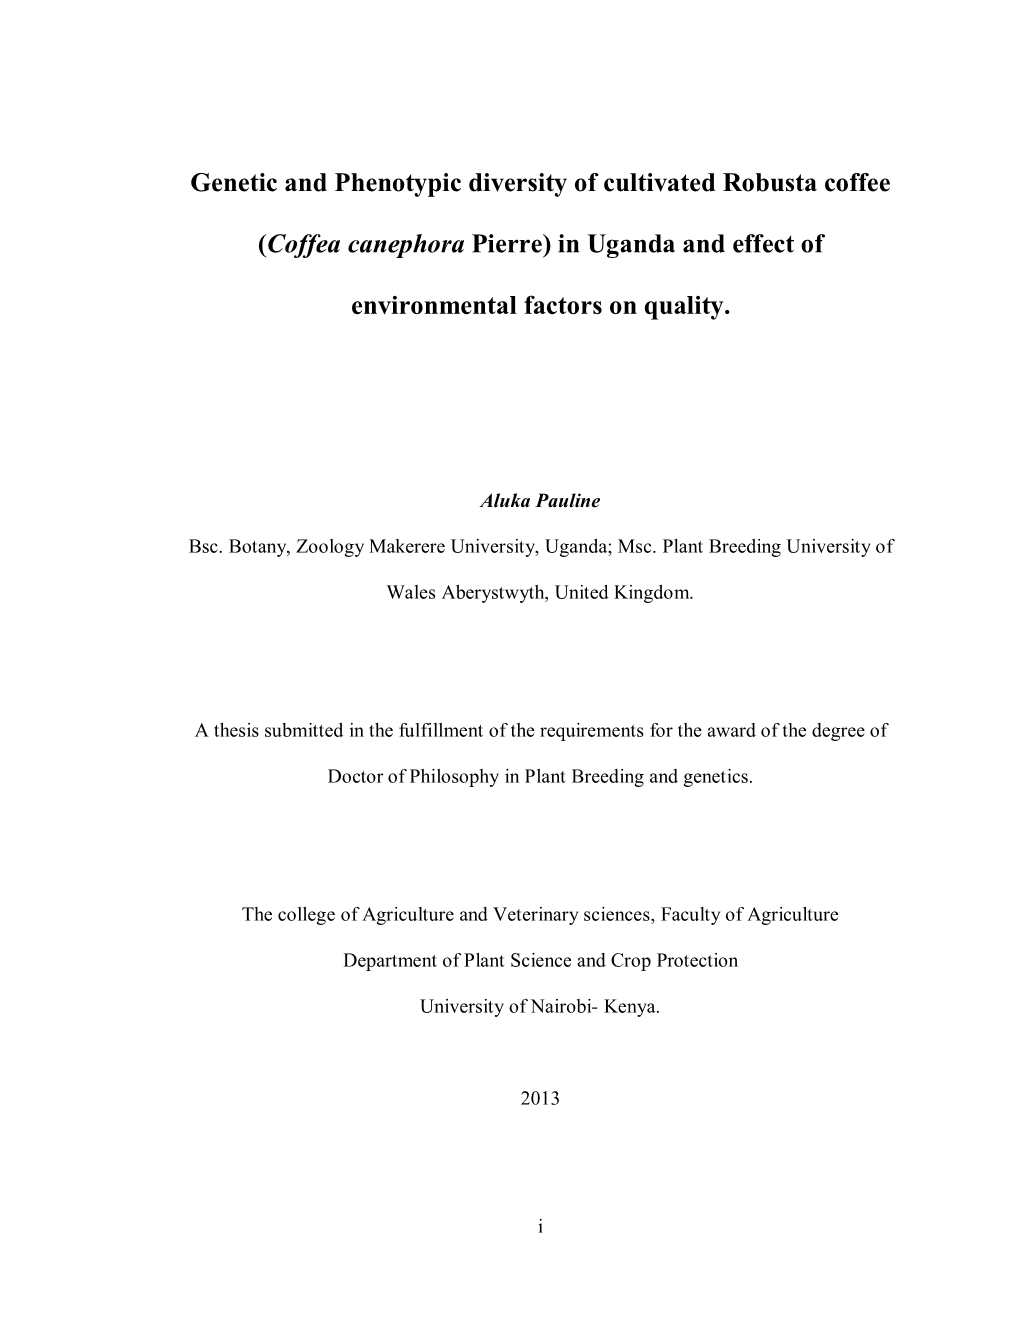 Genetic and Phenotypic Diversity of Cultivated Robusta Coffee